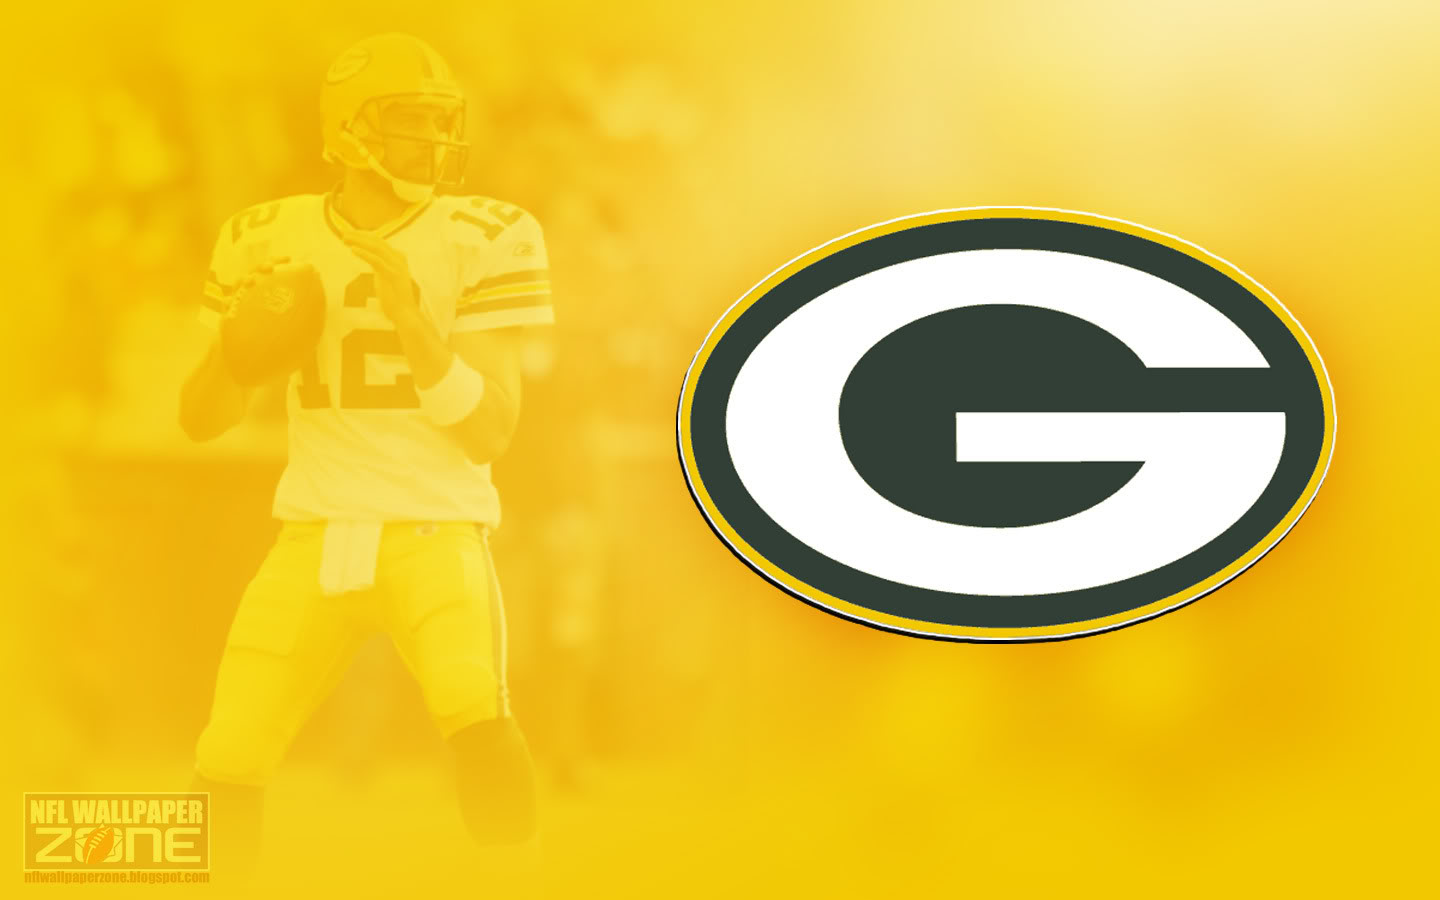 Green Bay Packers Picture